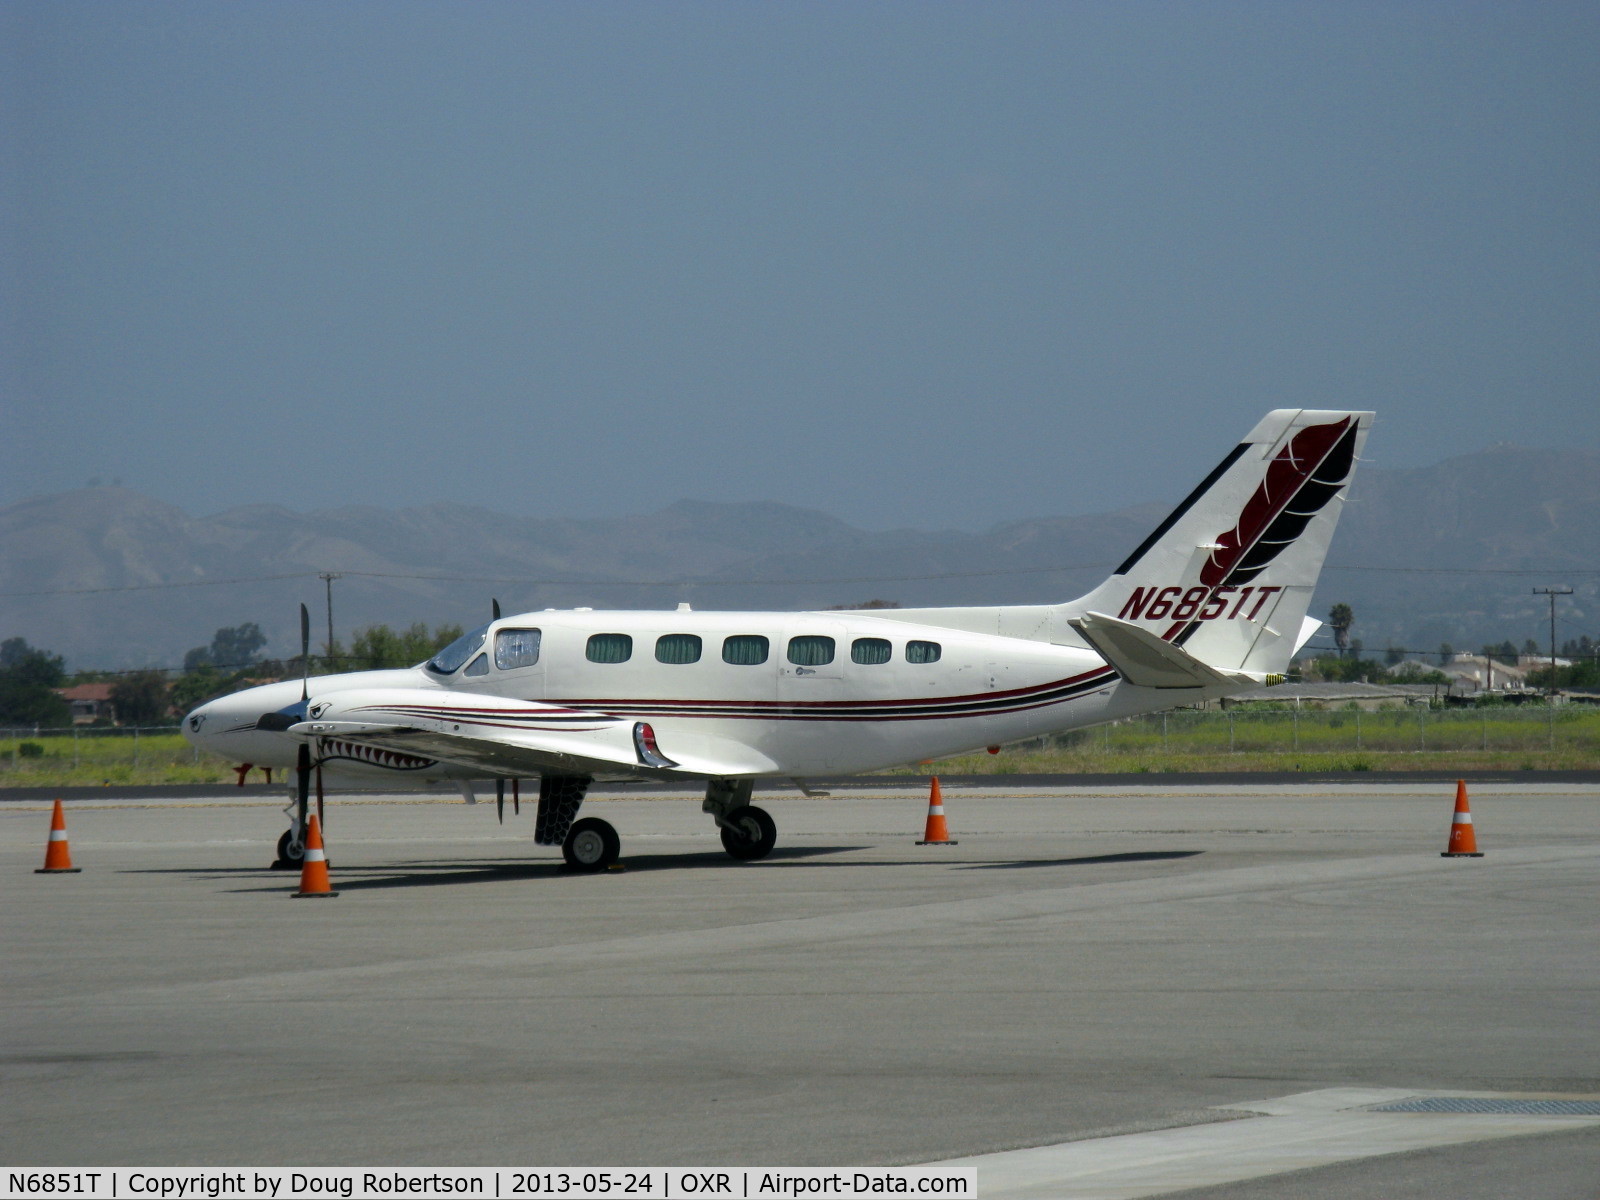 N6851T, 1981 Cessna 441 C/N 441-0211, 1981 Cessna 441 CONQUEST, two Garrett AiResearch TPE331-8-401S/402S Turboprops, each flat rated to 635.5 shp to 16,000'. Pressurized and air-conditioned.